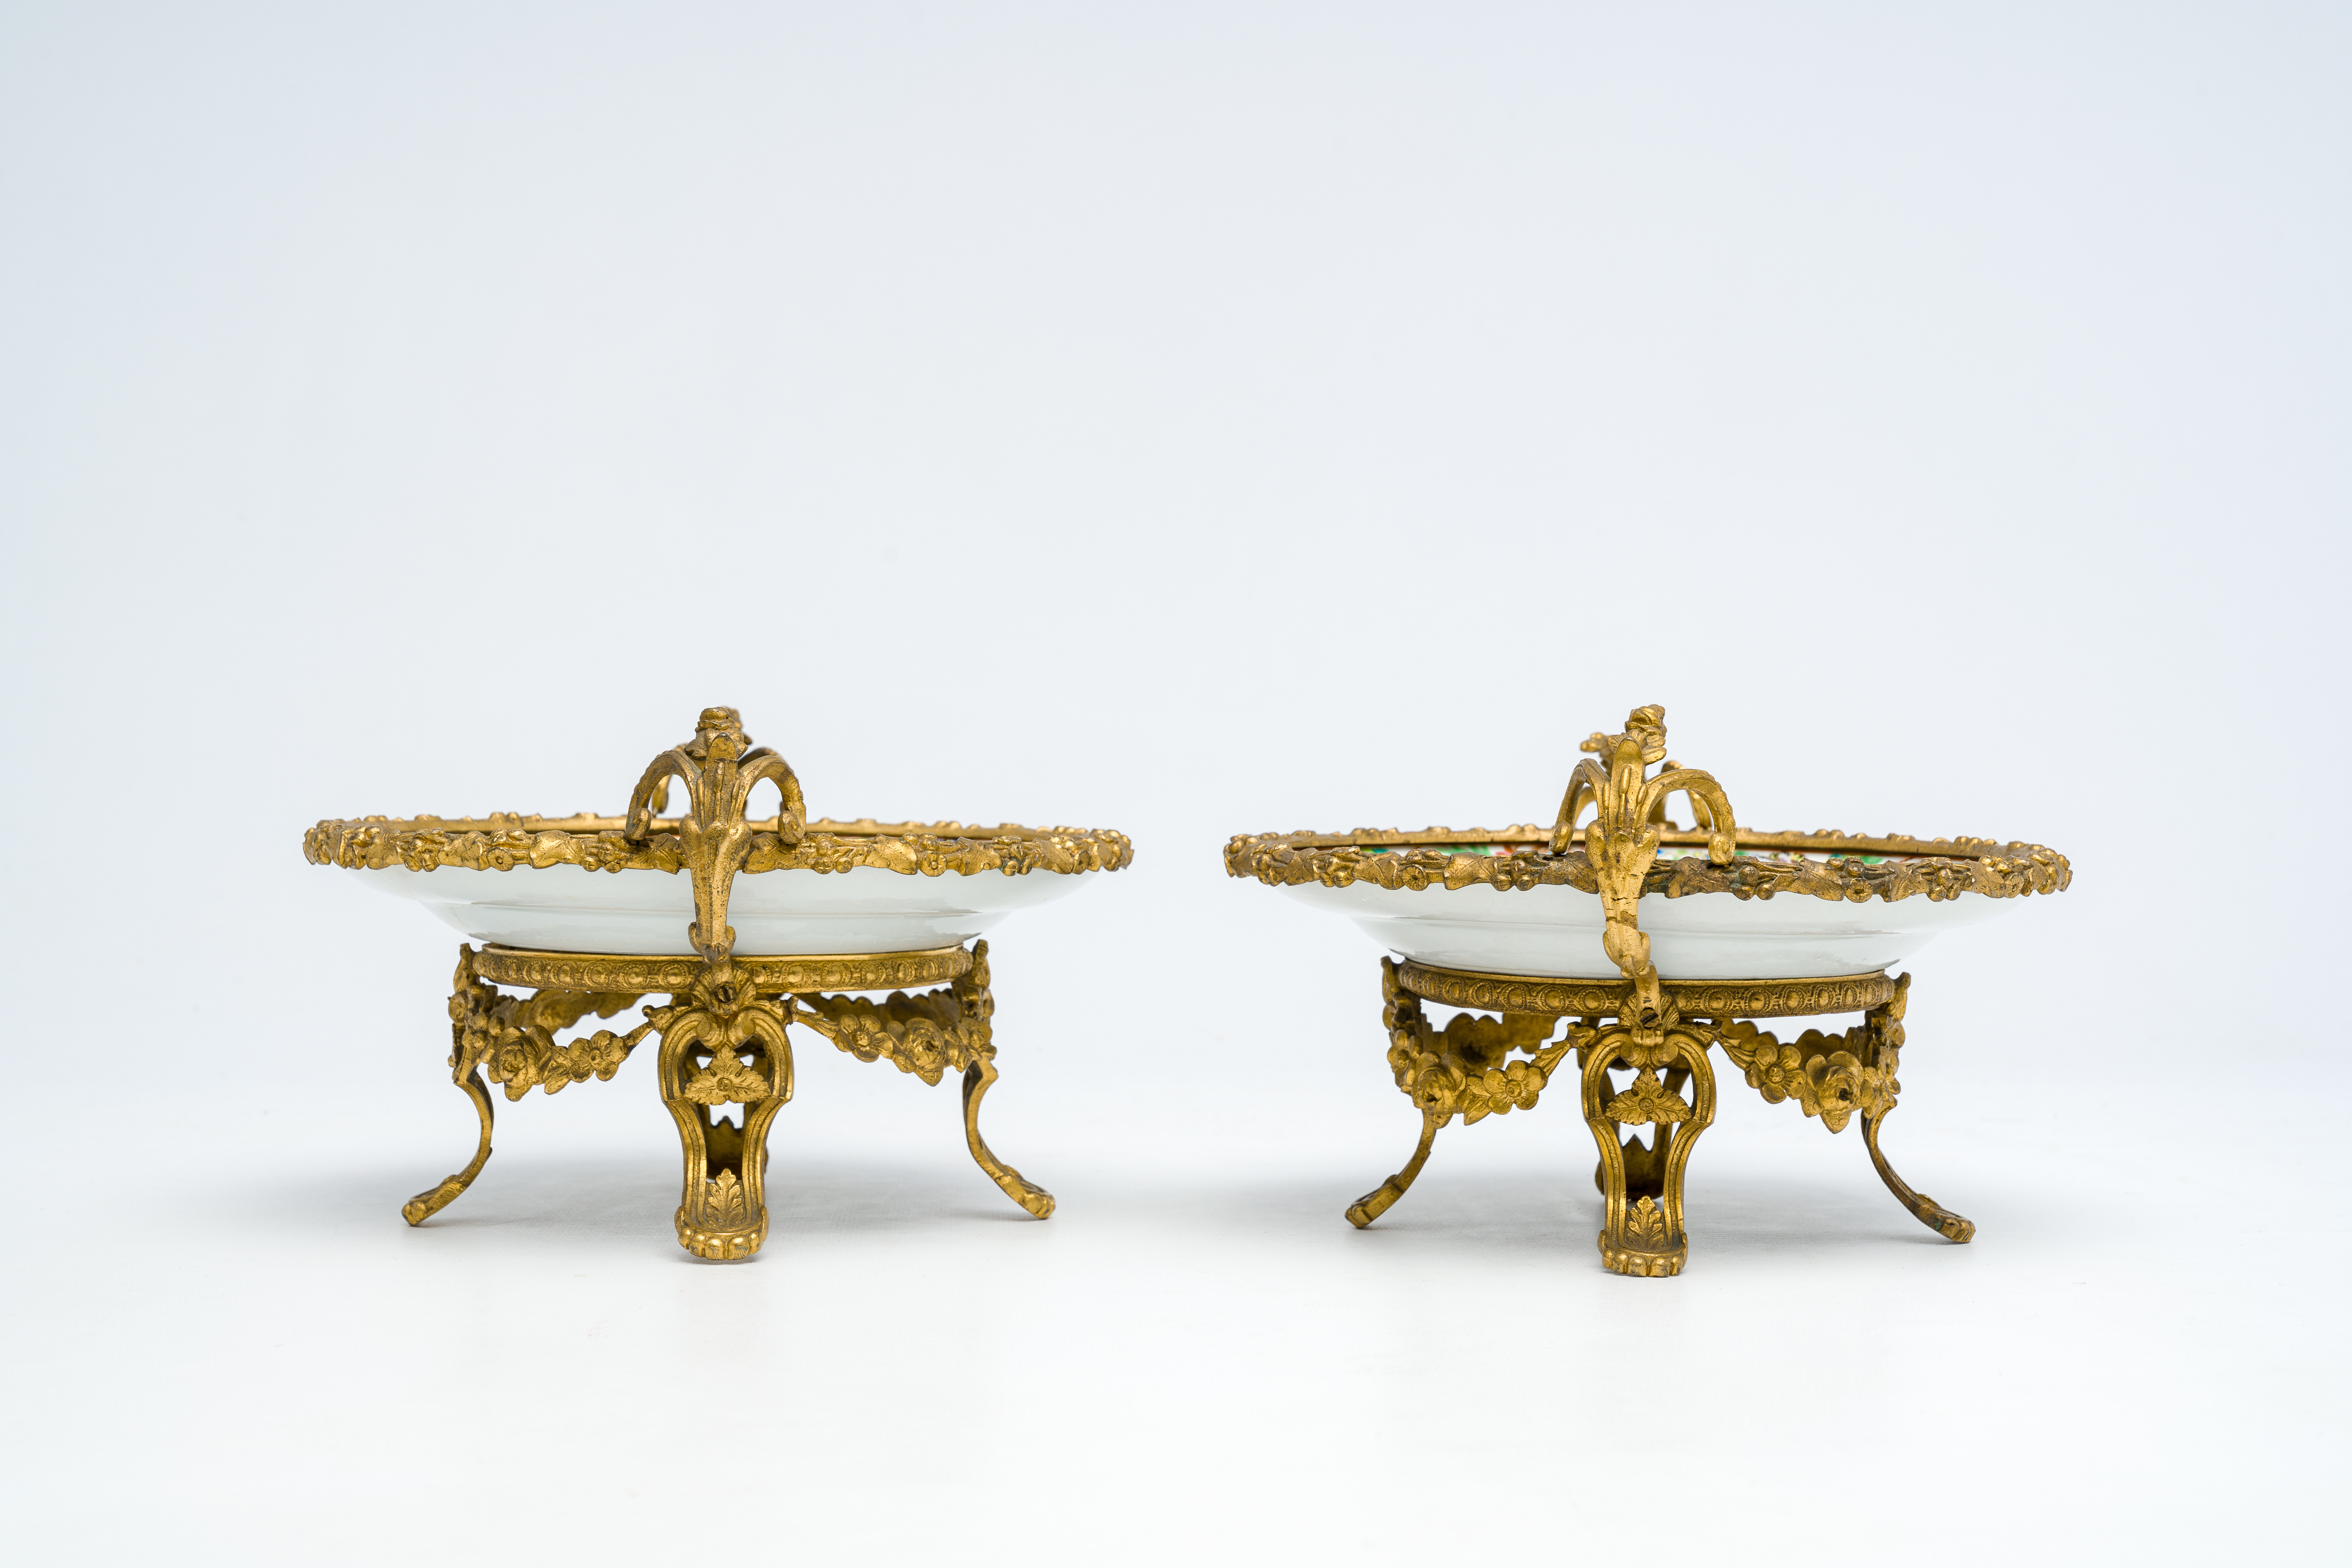 Two Chinese Canton famille rose gilt bronze mounted plates with figures on a terrace, 19th C. - Image 7 of 7